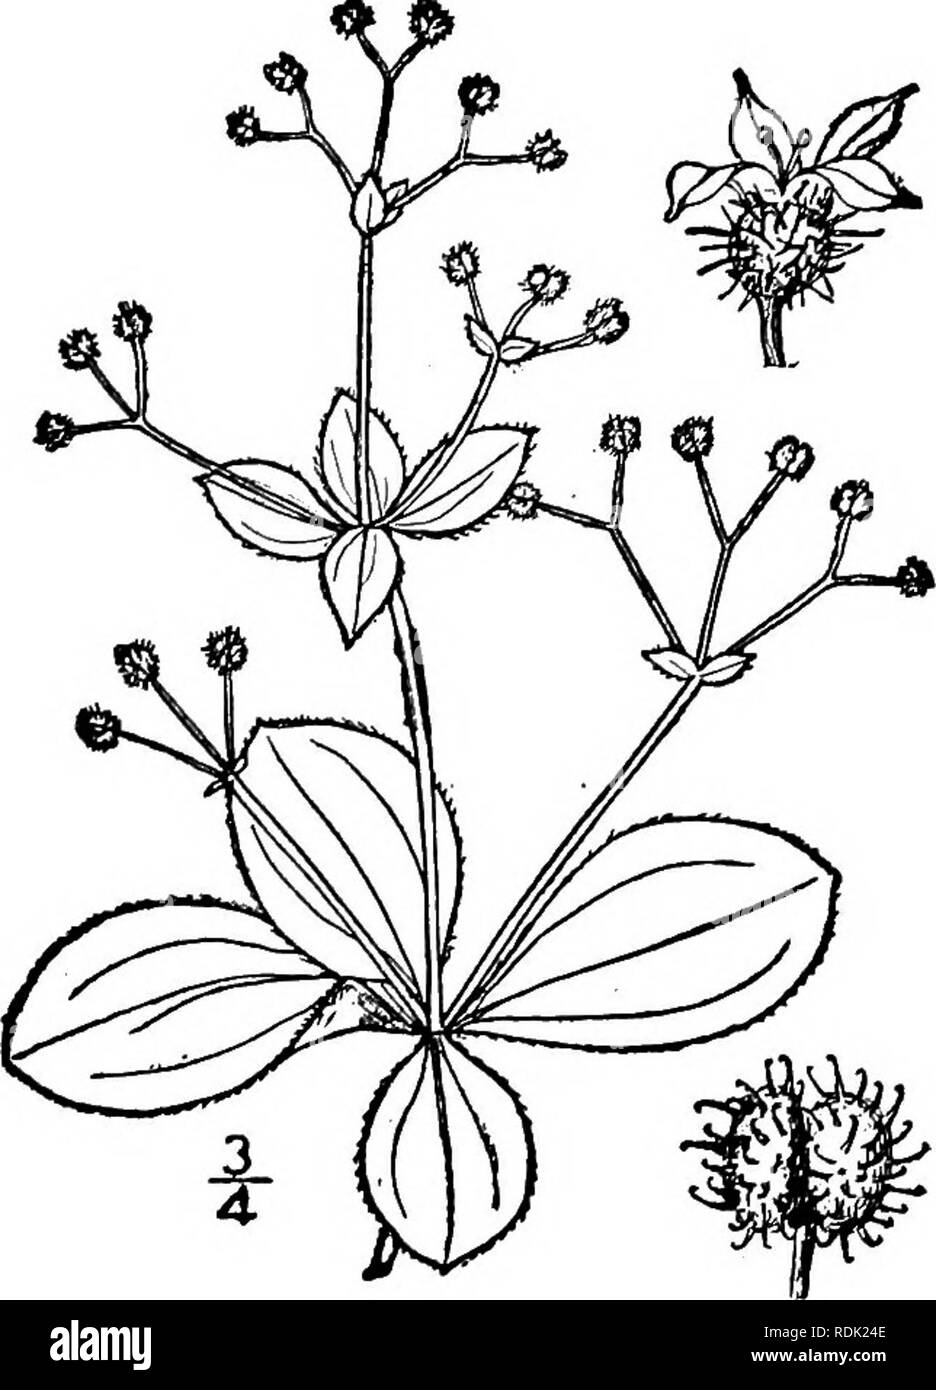 . An illustrated flora of the northern United States, Canada and the British possessions, from Newfoundland to the parallel of the southern boundary of Virginia, and from the Atlantic Ocean westward to the 102d meridian. Botany; Botany. Genus 7. MADDER FAMILY 9. Galium circaezans Michx. Wild Liquorice. Cross-Cleavers. Fig- 3936- G. circaezans Michx. Fl. Bor. Am. 1: 80. 1803. Galium circaezans glabellum Britton, Mem. Torr. Club 5 : 303. 1894. Perennial, more or less pubescent, or gla- brate, branched, l°-2° high. Leaves in 4's, oval, oval-lanceolate or ovate, obtuse or ob- tusish at the apex, 3 Stock Photo